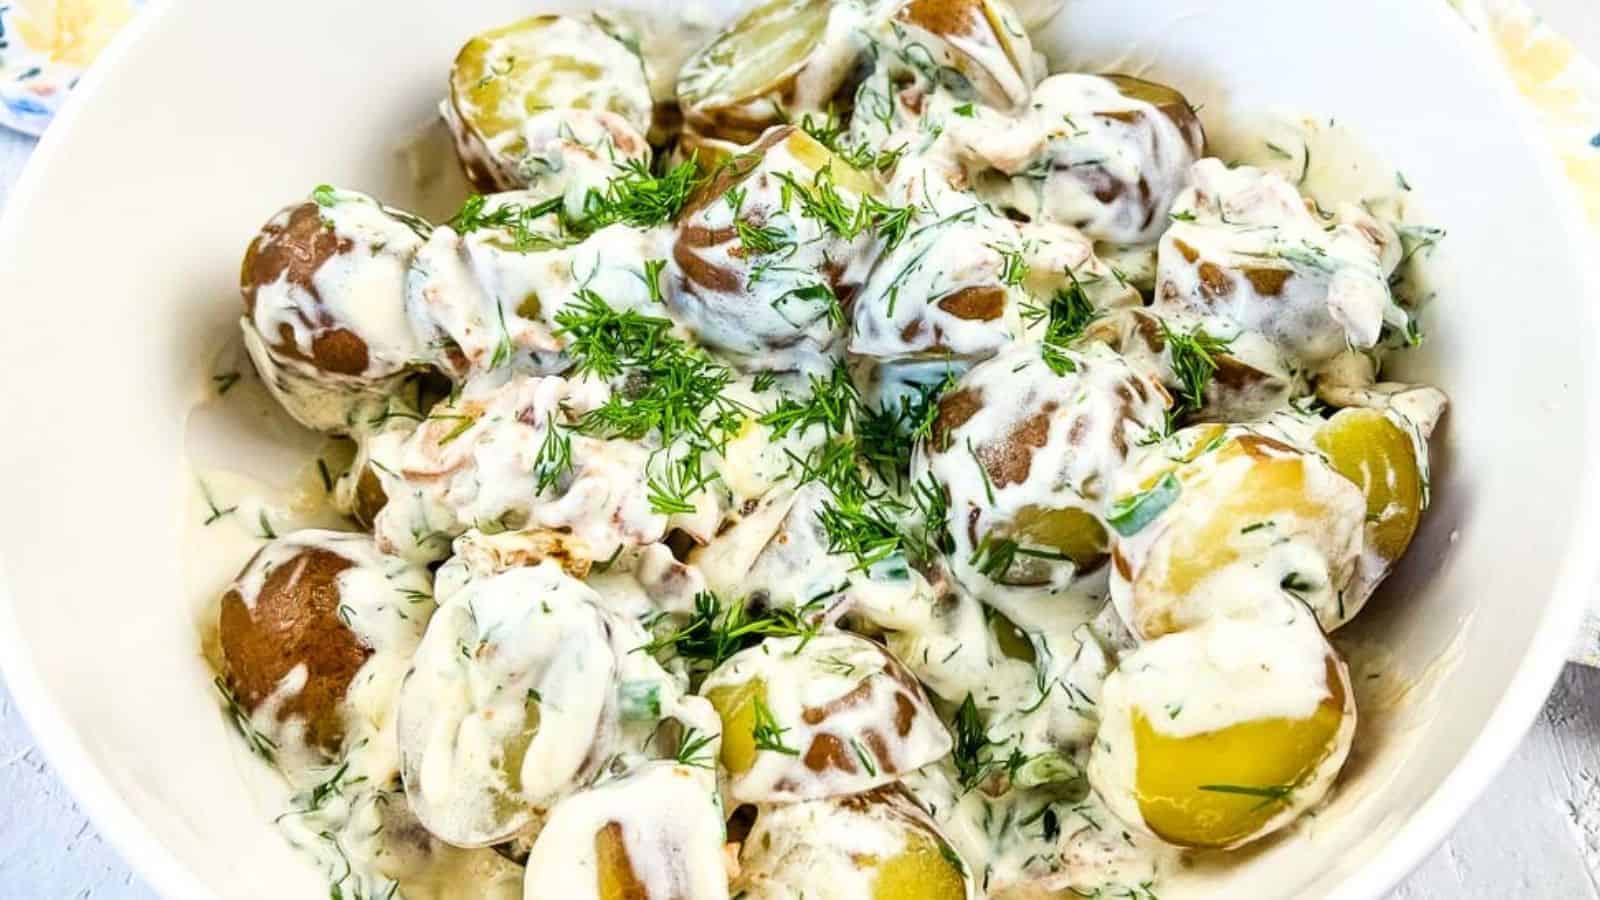 A bowl of boiled potatoes with skins on, topped with a creamy herb sauce and garnished with chopped fresh dill.